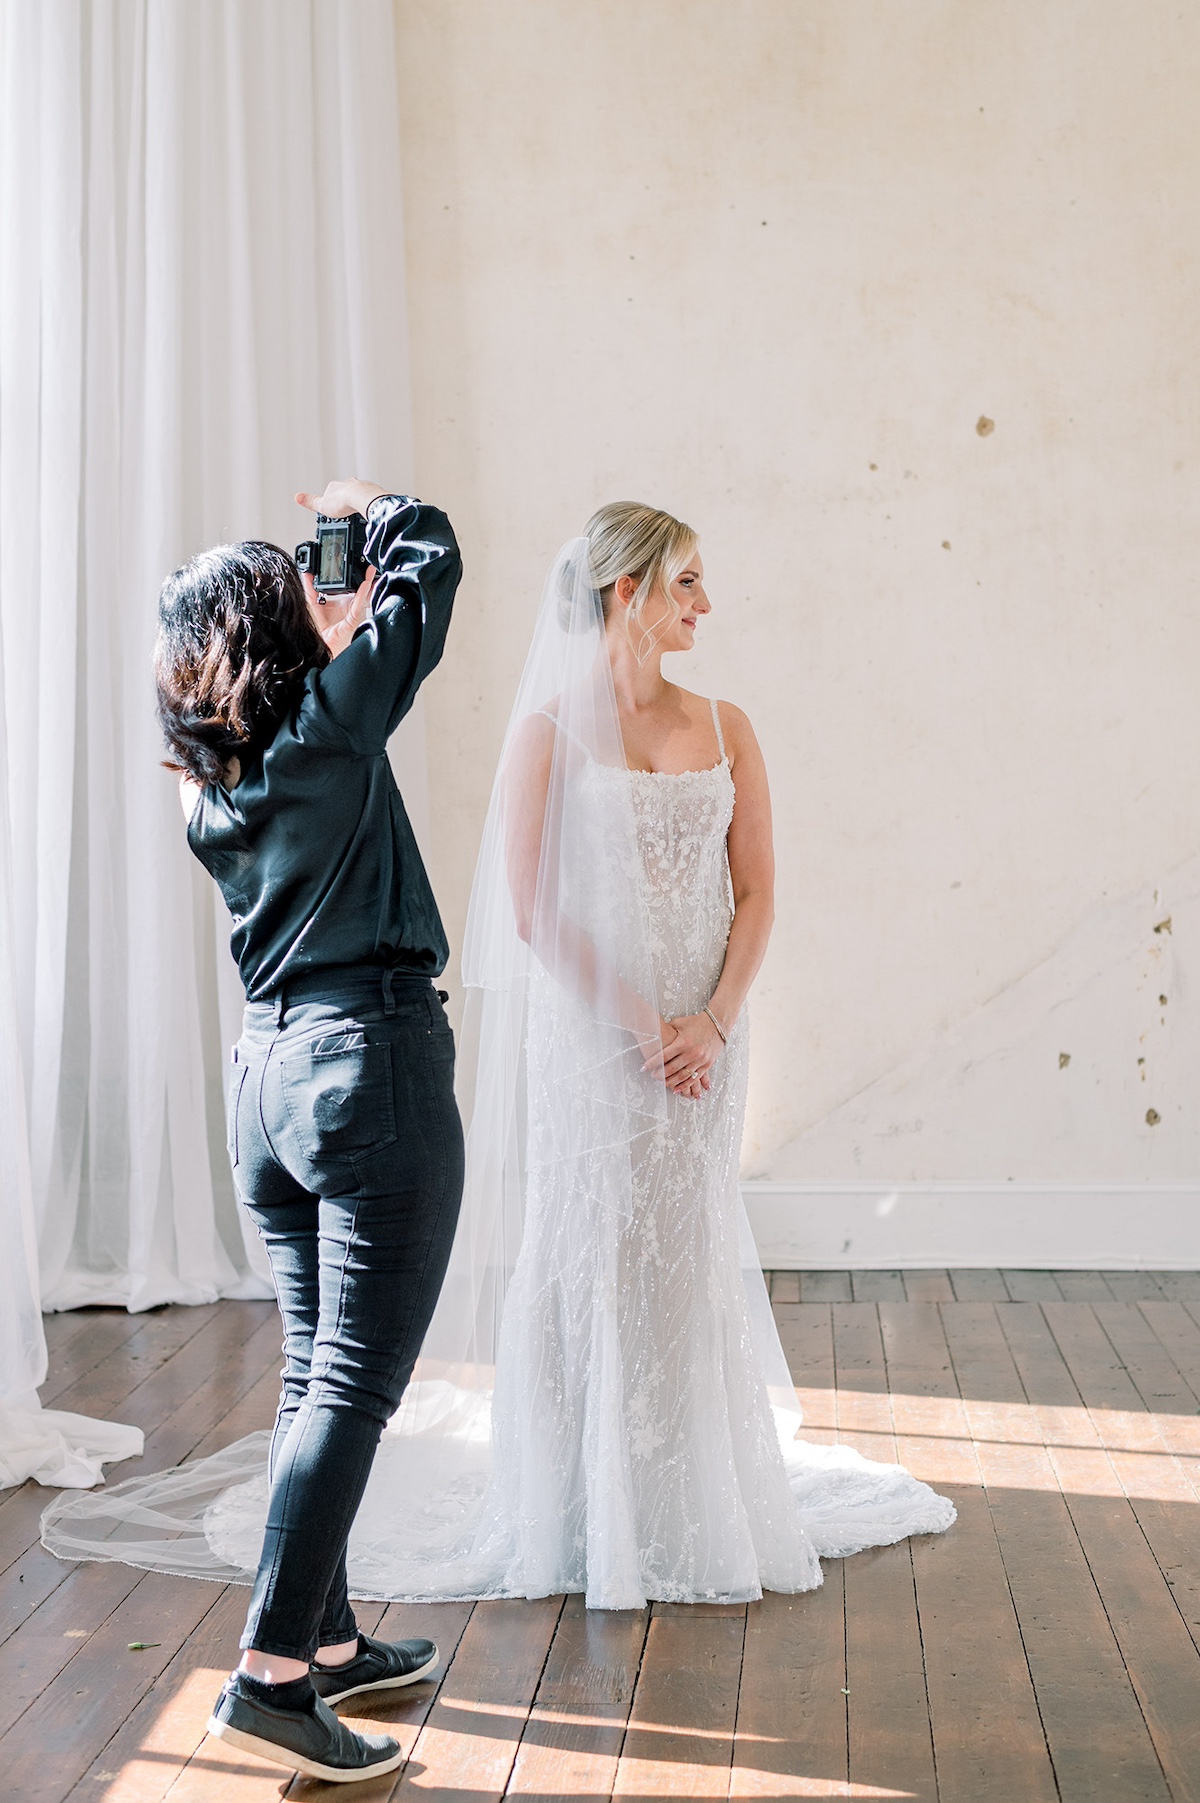 A sneak peek behind the scenes as the photographer, immersed in creative focus, captures the intimate and candid moments of Kelly and Adam's wedding.